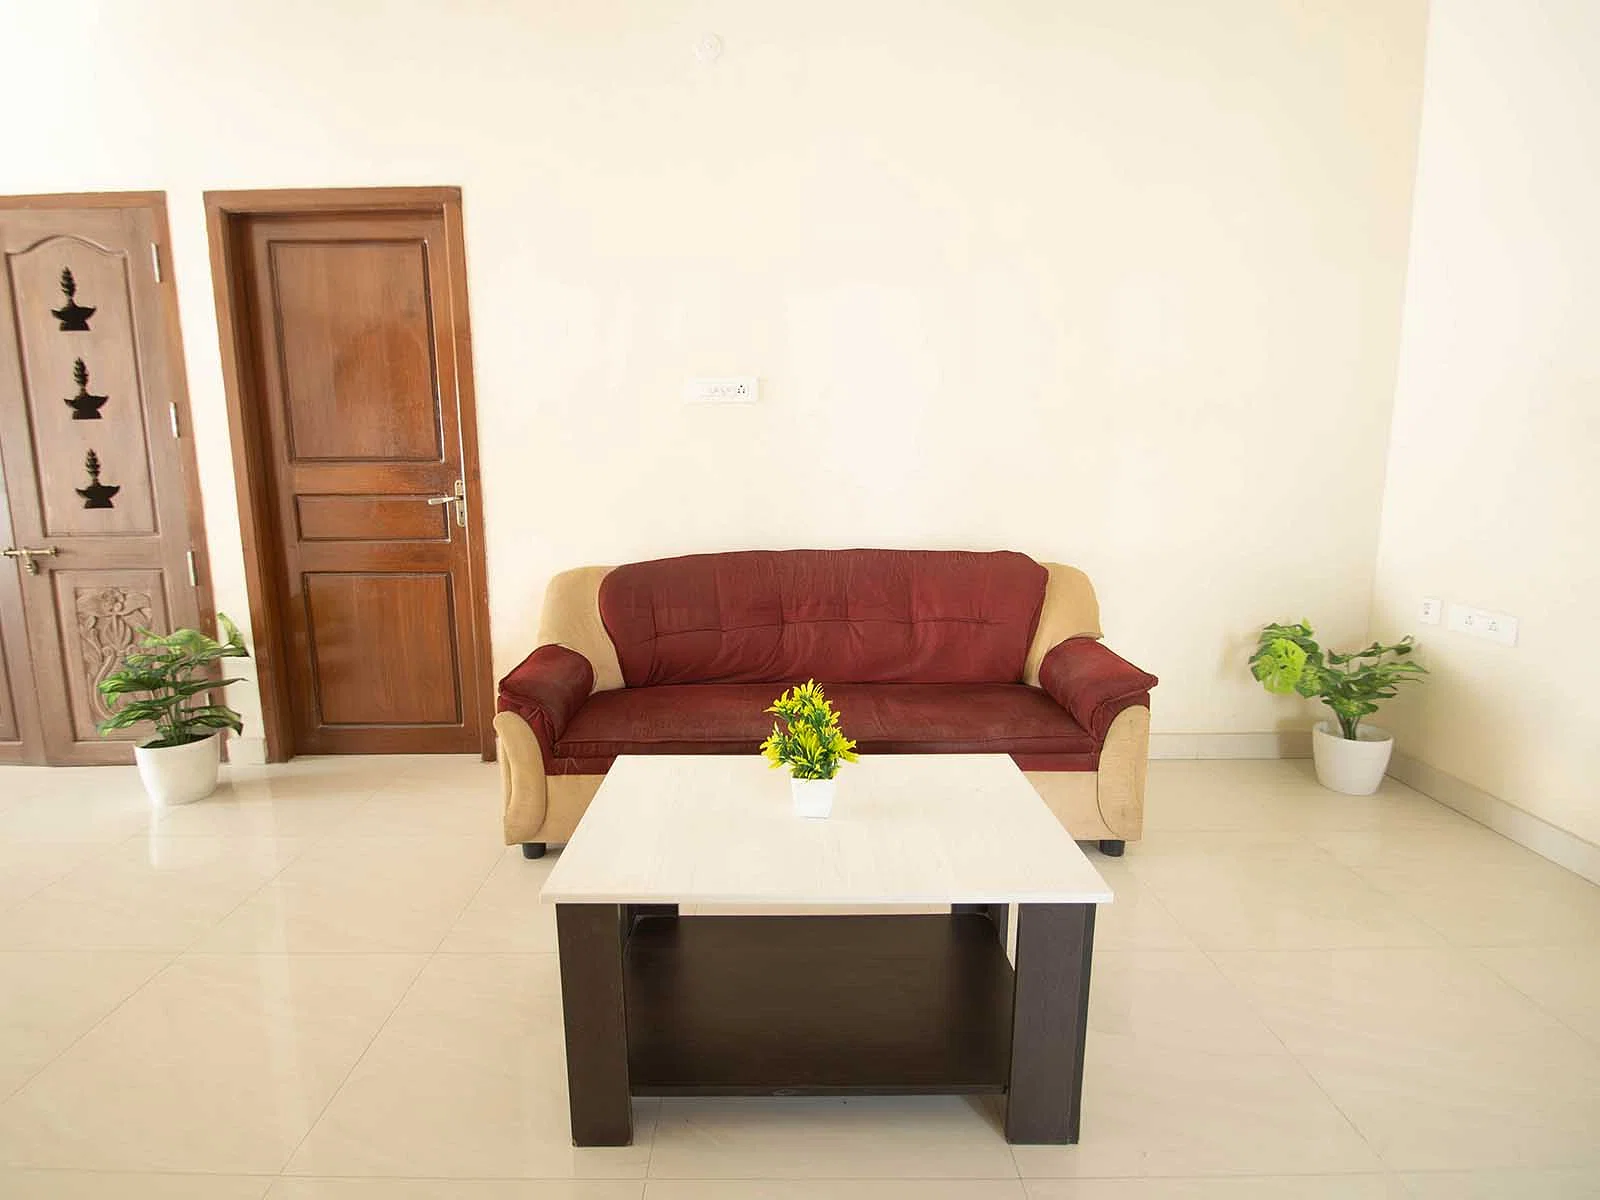 Affordable single rooms for students and working professionals in Velachery-Chennai-Zolo Belford